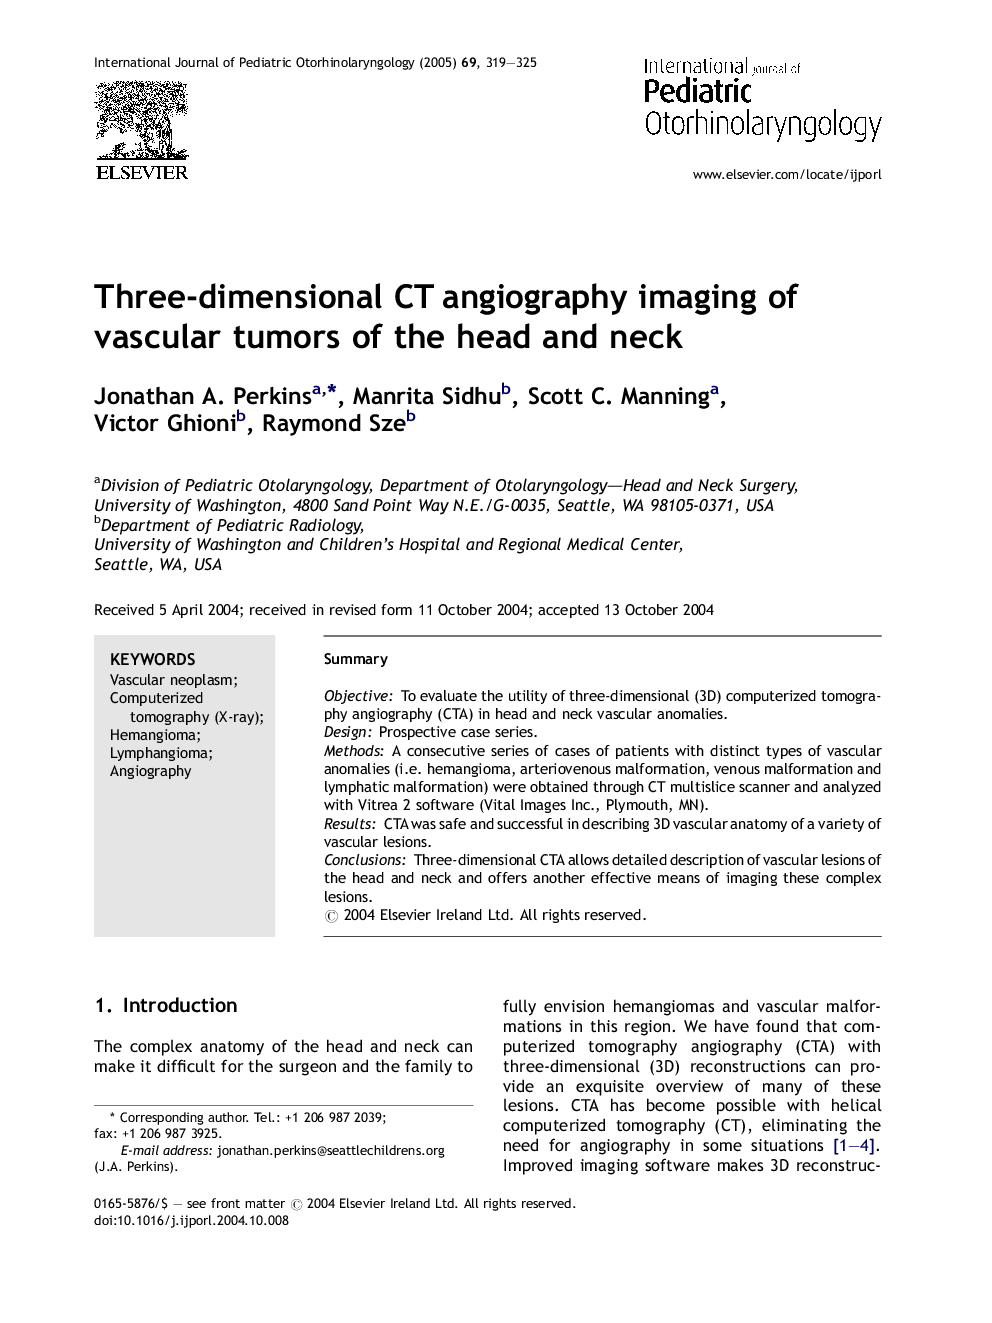 Three-dimensional CT angiography imaging of vascular tumors of the head and neck